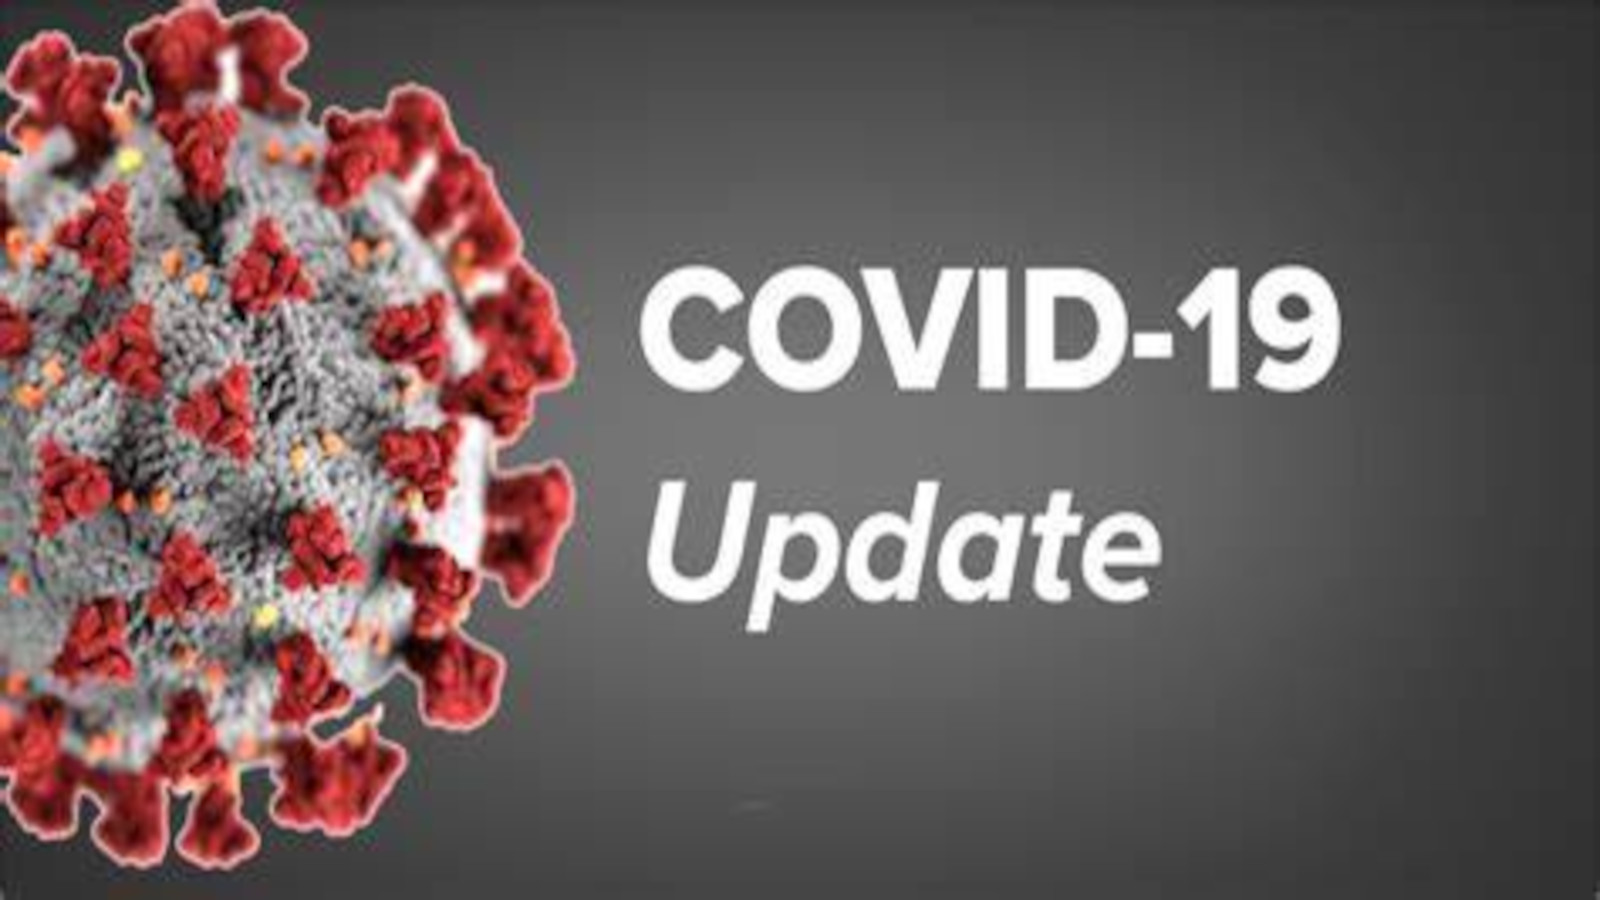 Statement from the Executive COVID-19 Omicron update 